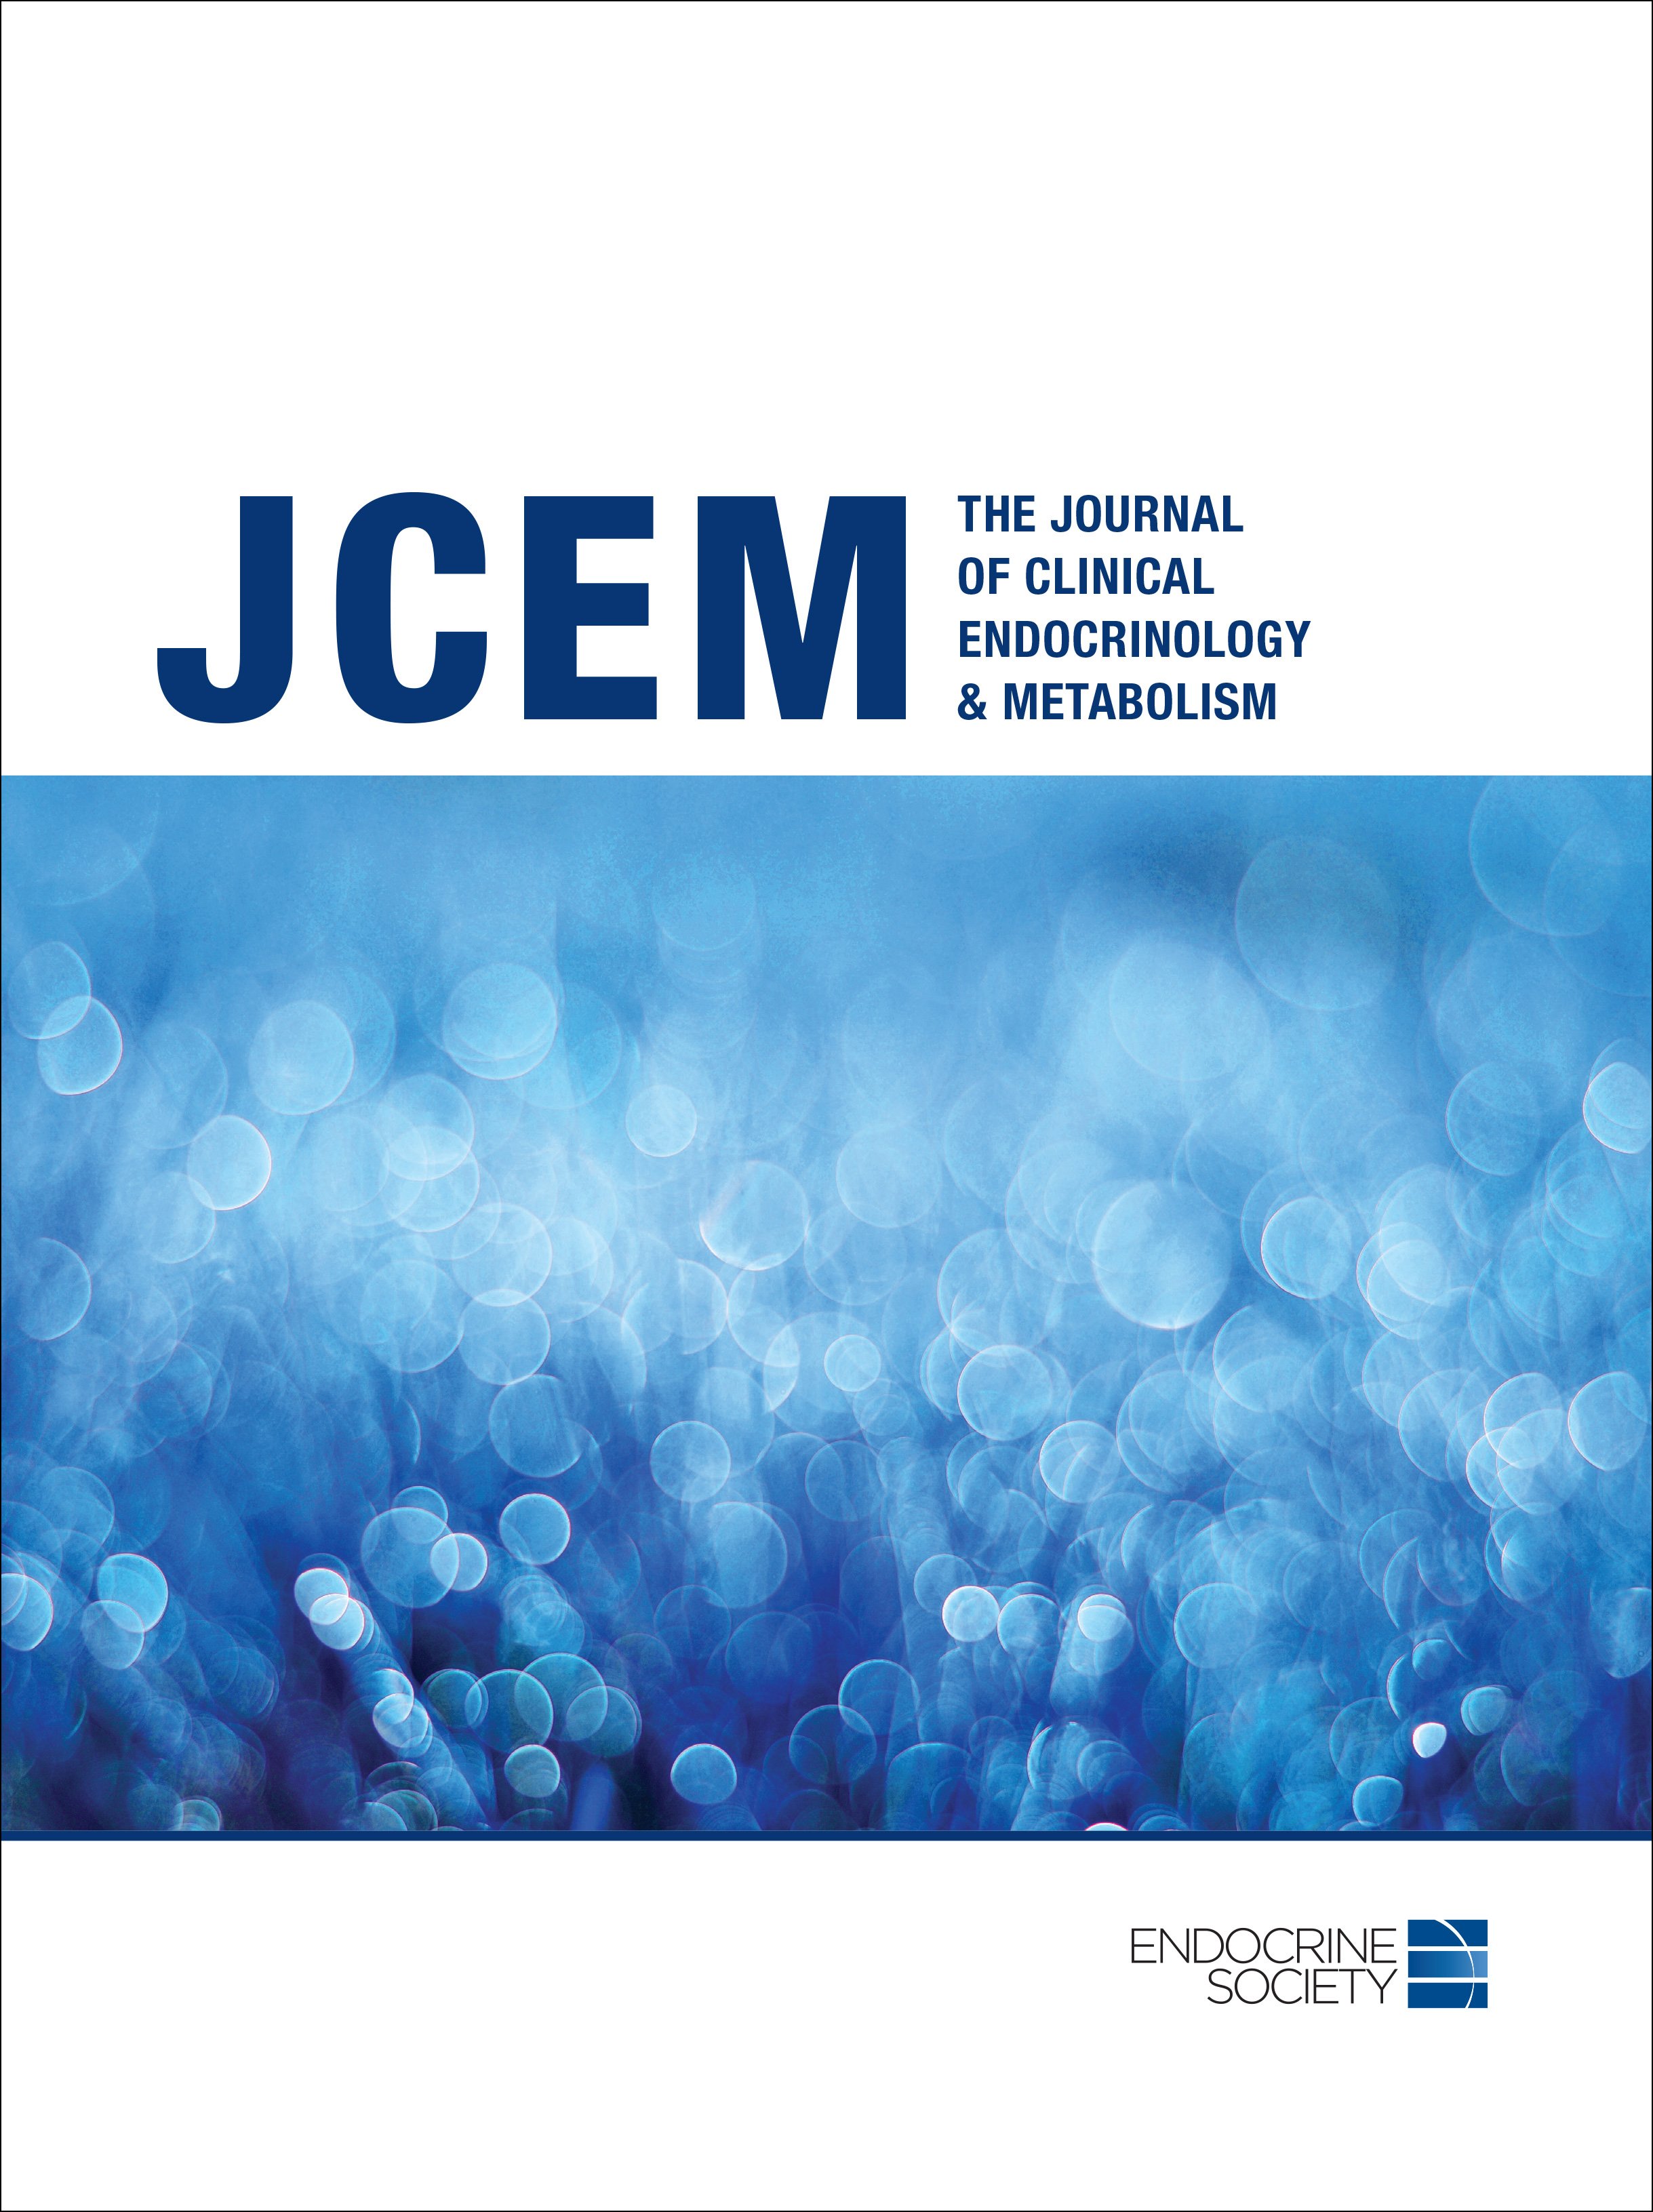 clinical diabetes and endocrinology journal